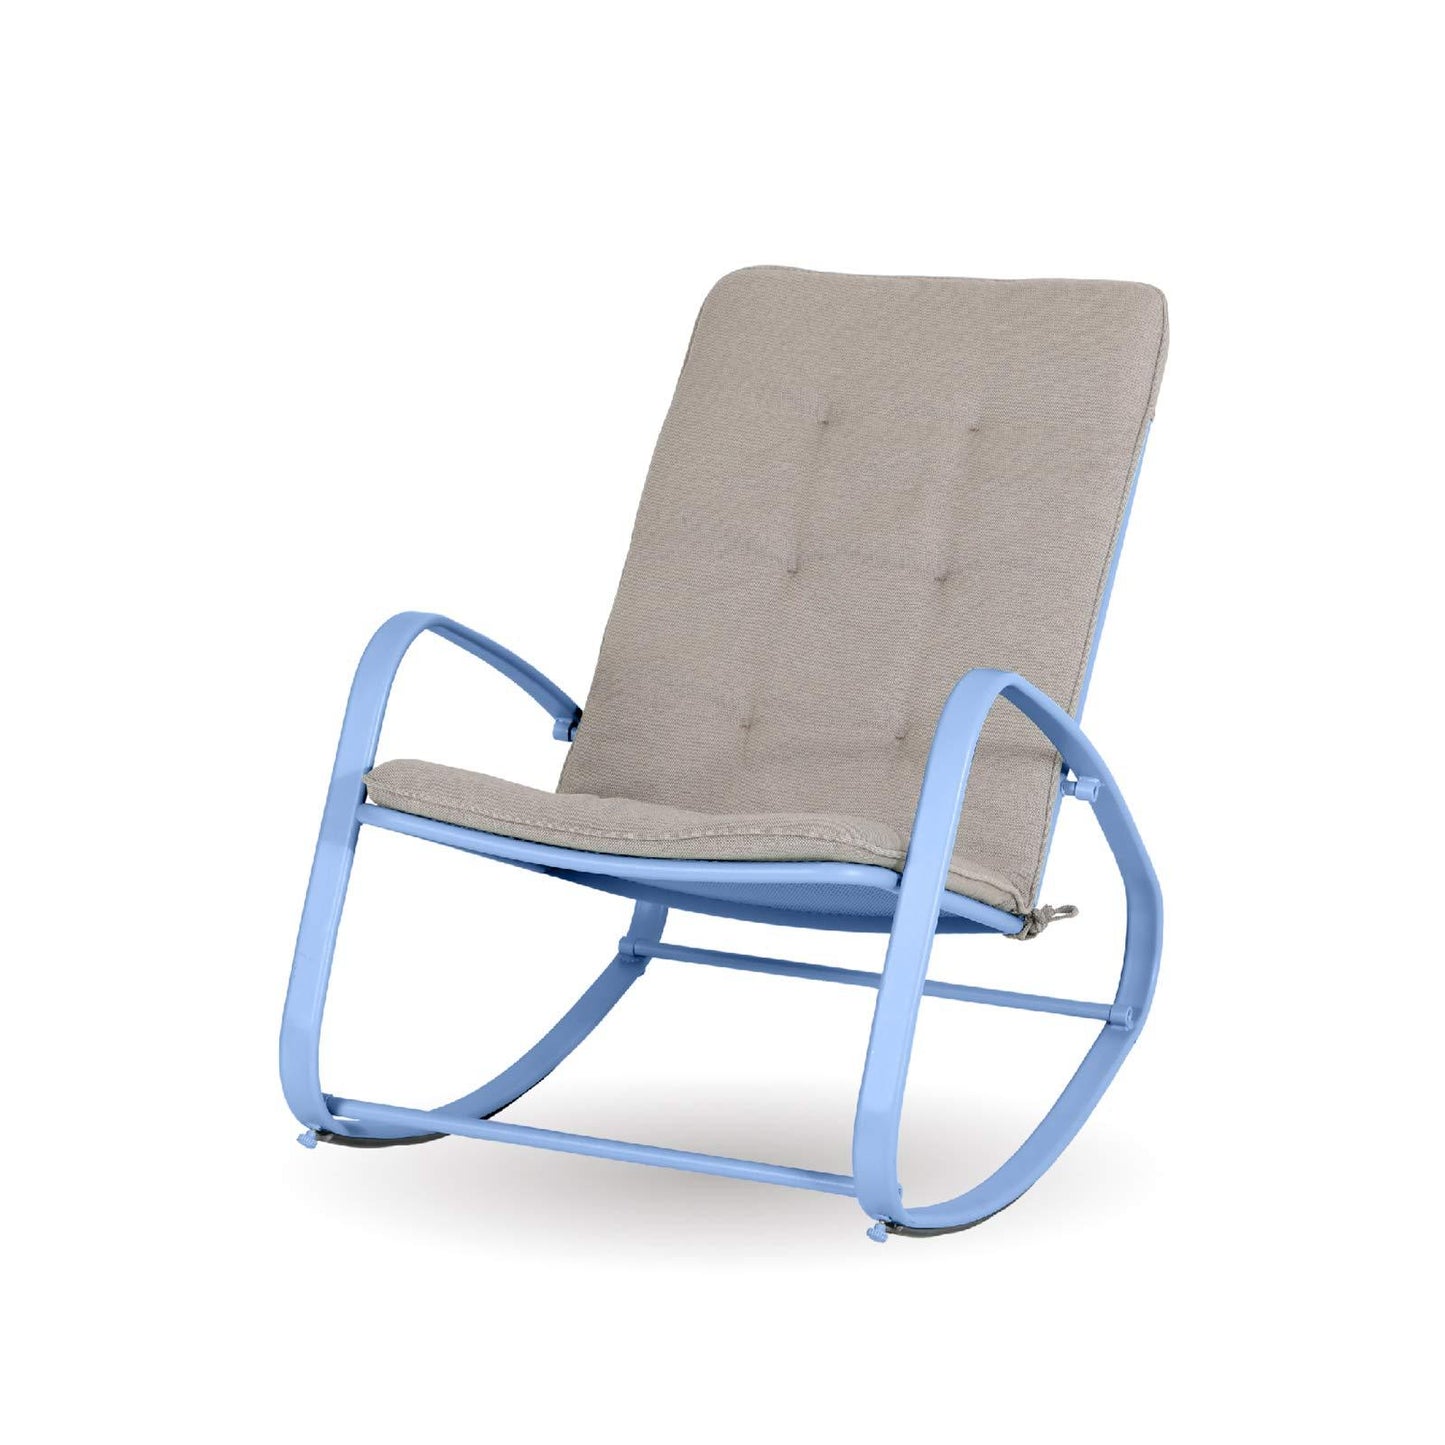 Sophia & William Outdoor Padded Rocking Chairs with Blue E-coated Steel Frame